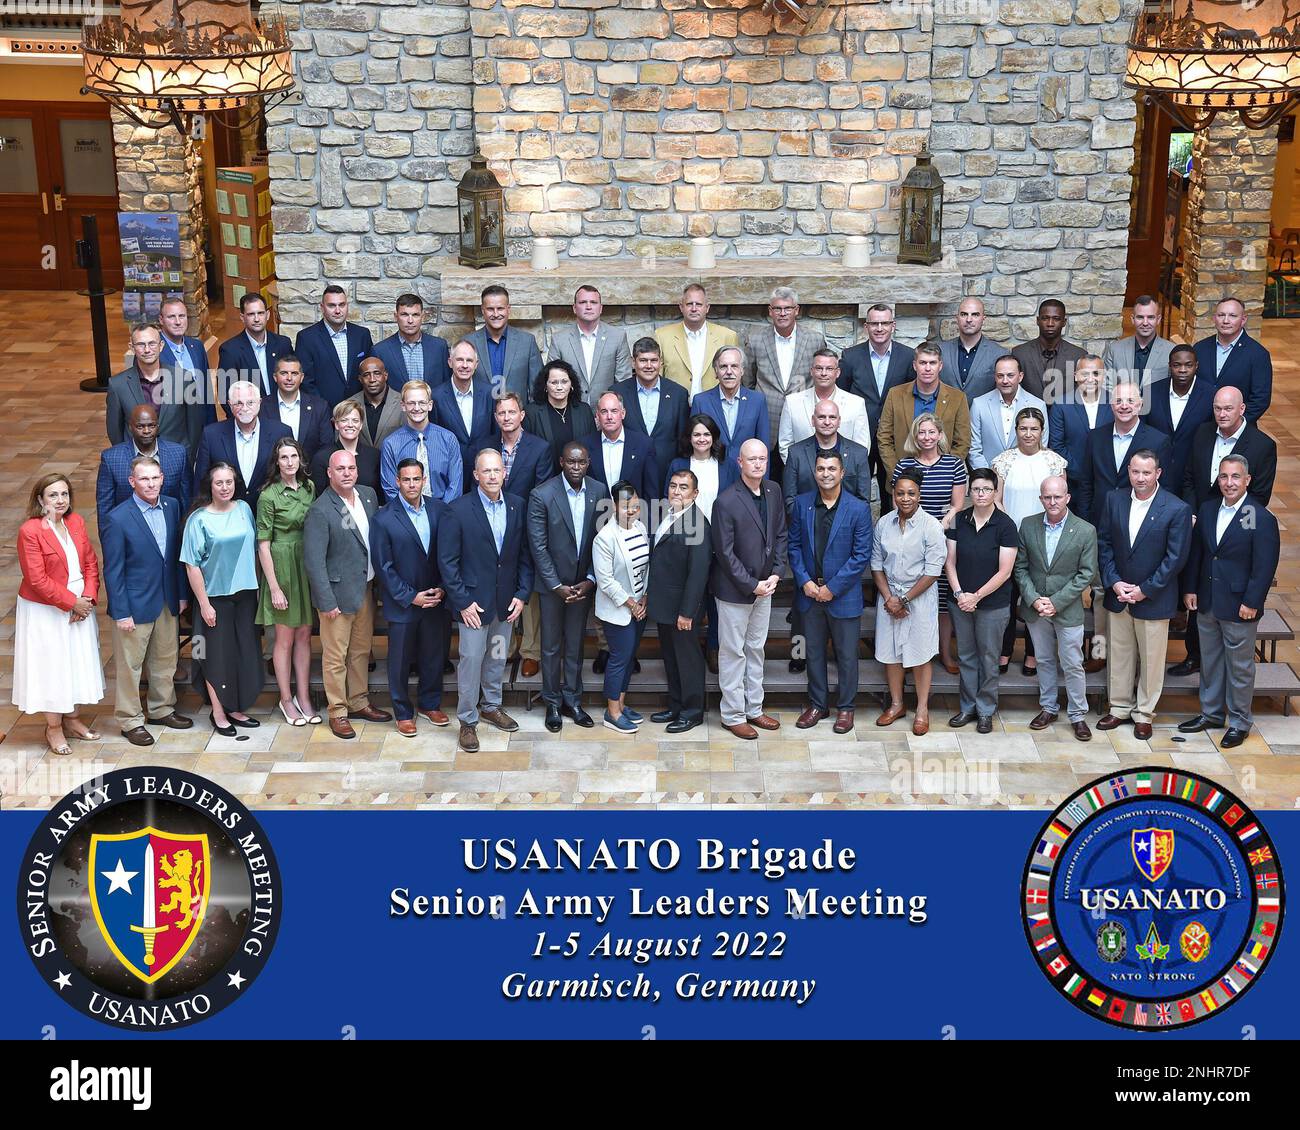 The U.S. Army NATO Brigade hosted its 21st annual Senior Army Leaders Meeting August 1-5 to give leaders from 81 locations in 22 countries the opportunity to meet face-to-face and share knowledge and ideas on NATO operations and how best to support the roughly 1,300 Soldiers serving within NATO organizations. Stock Photo